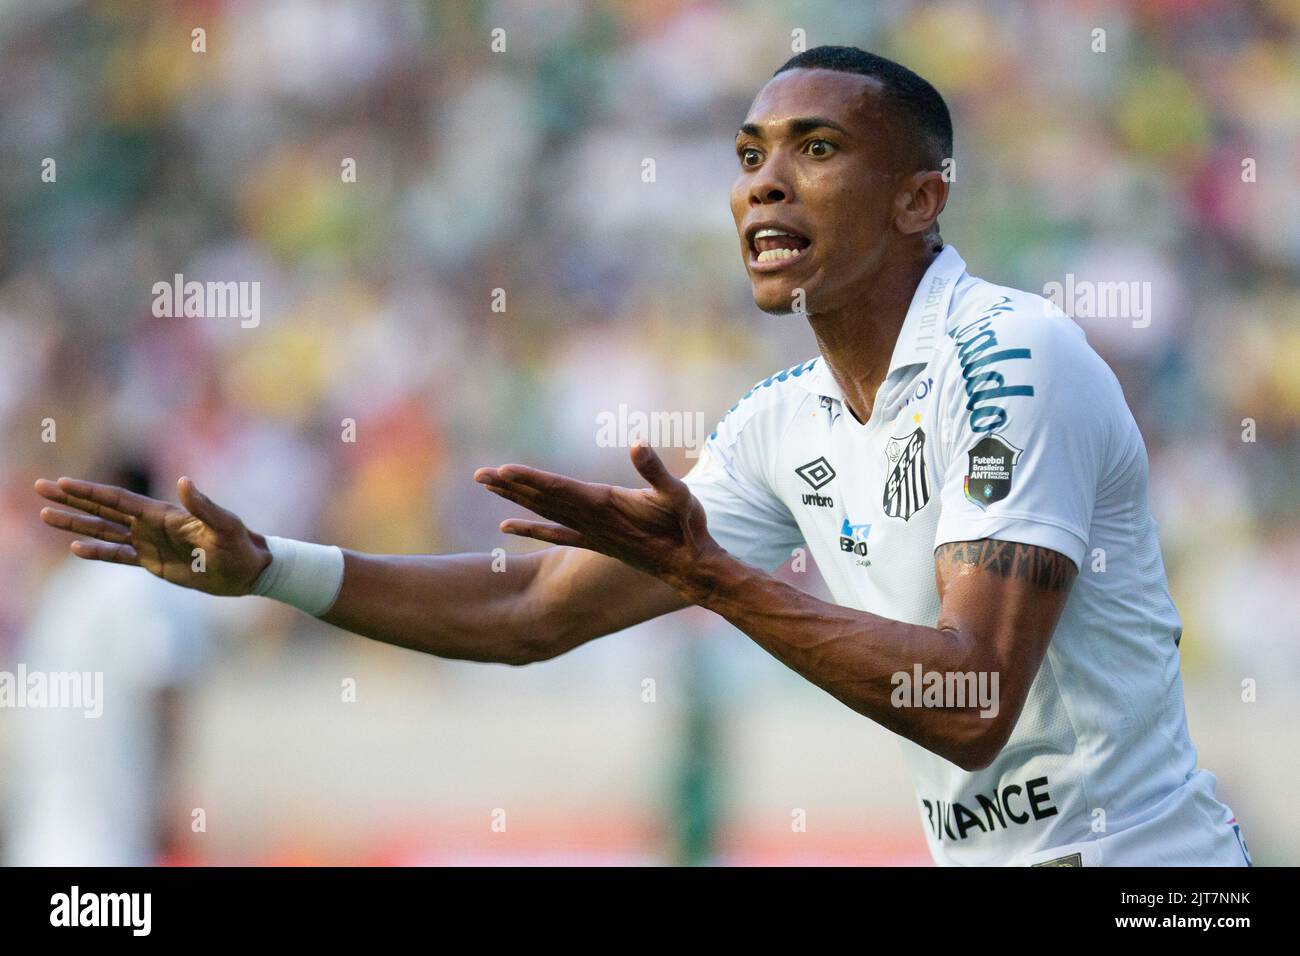 Cuiaba, Brazil. 28th Aug, 2022. MT - Cuiaba - 08/28/2022 - BRAZILIAN A 2022, CUIABA X SANTOS - Santos player Madson complains to the referee during a match against Cuiaba at the Arena Pantanal stadium for the Brazilian championship A 2022. Photo: Gil Gomes/AGIF/Sipa USA Credit: Sipa USA/Alamy Live News Stock Photo